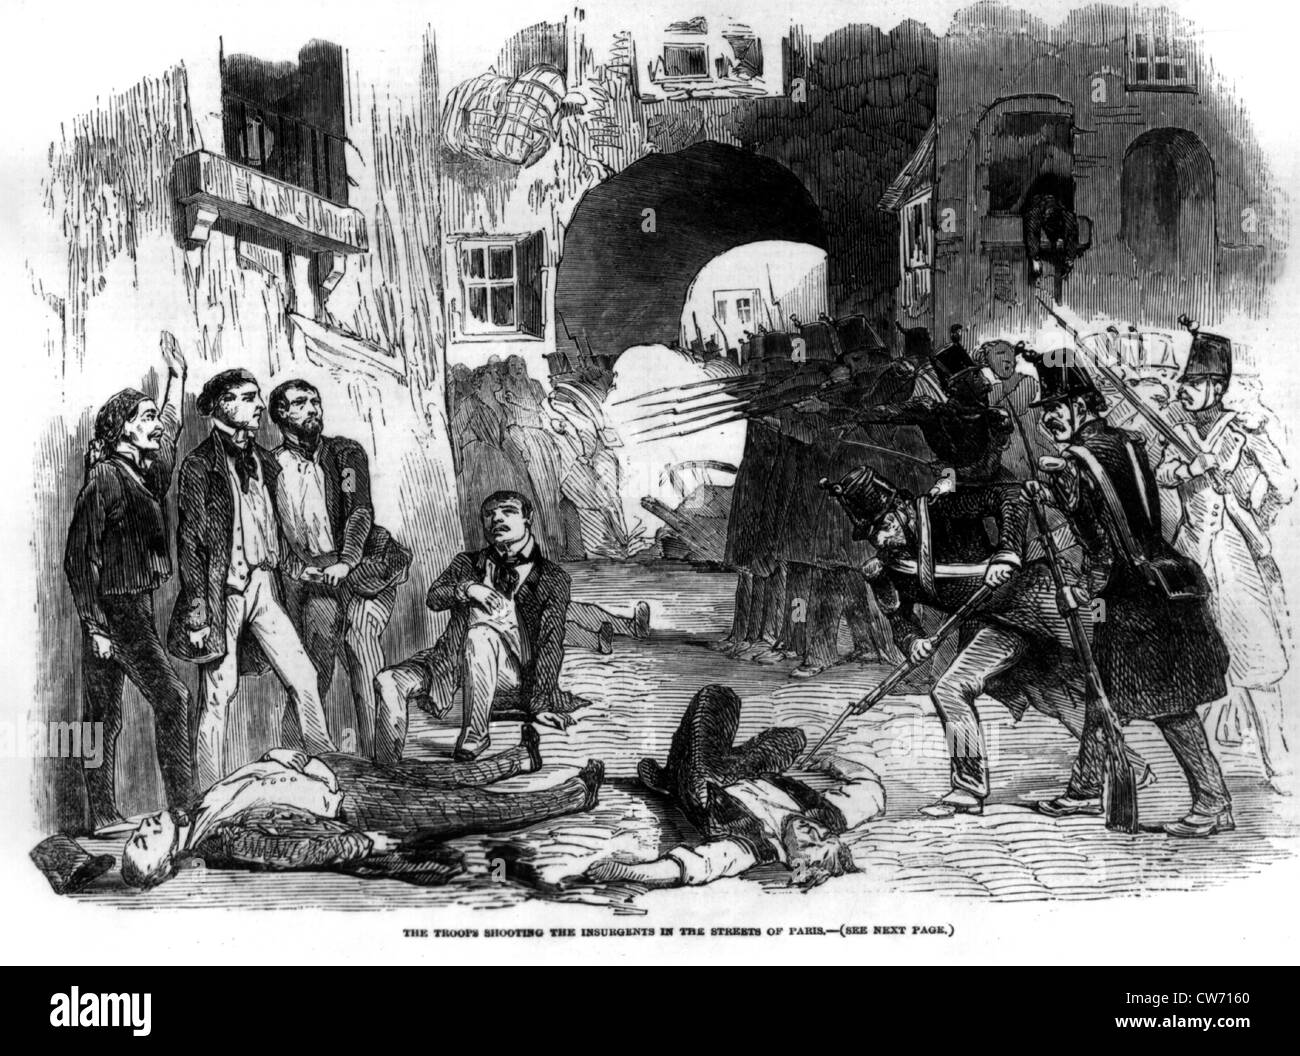 On December 2, 1851 and the following days, the rebels are shooted in the streets by the soldiers Stock Photo